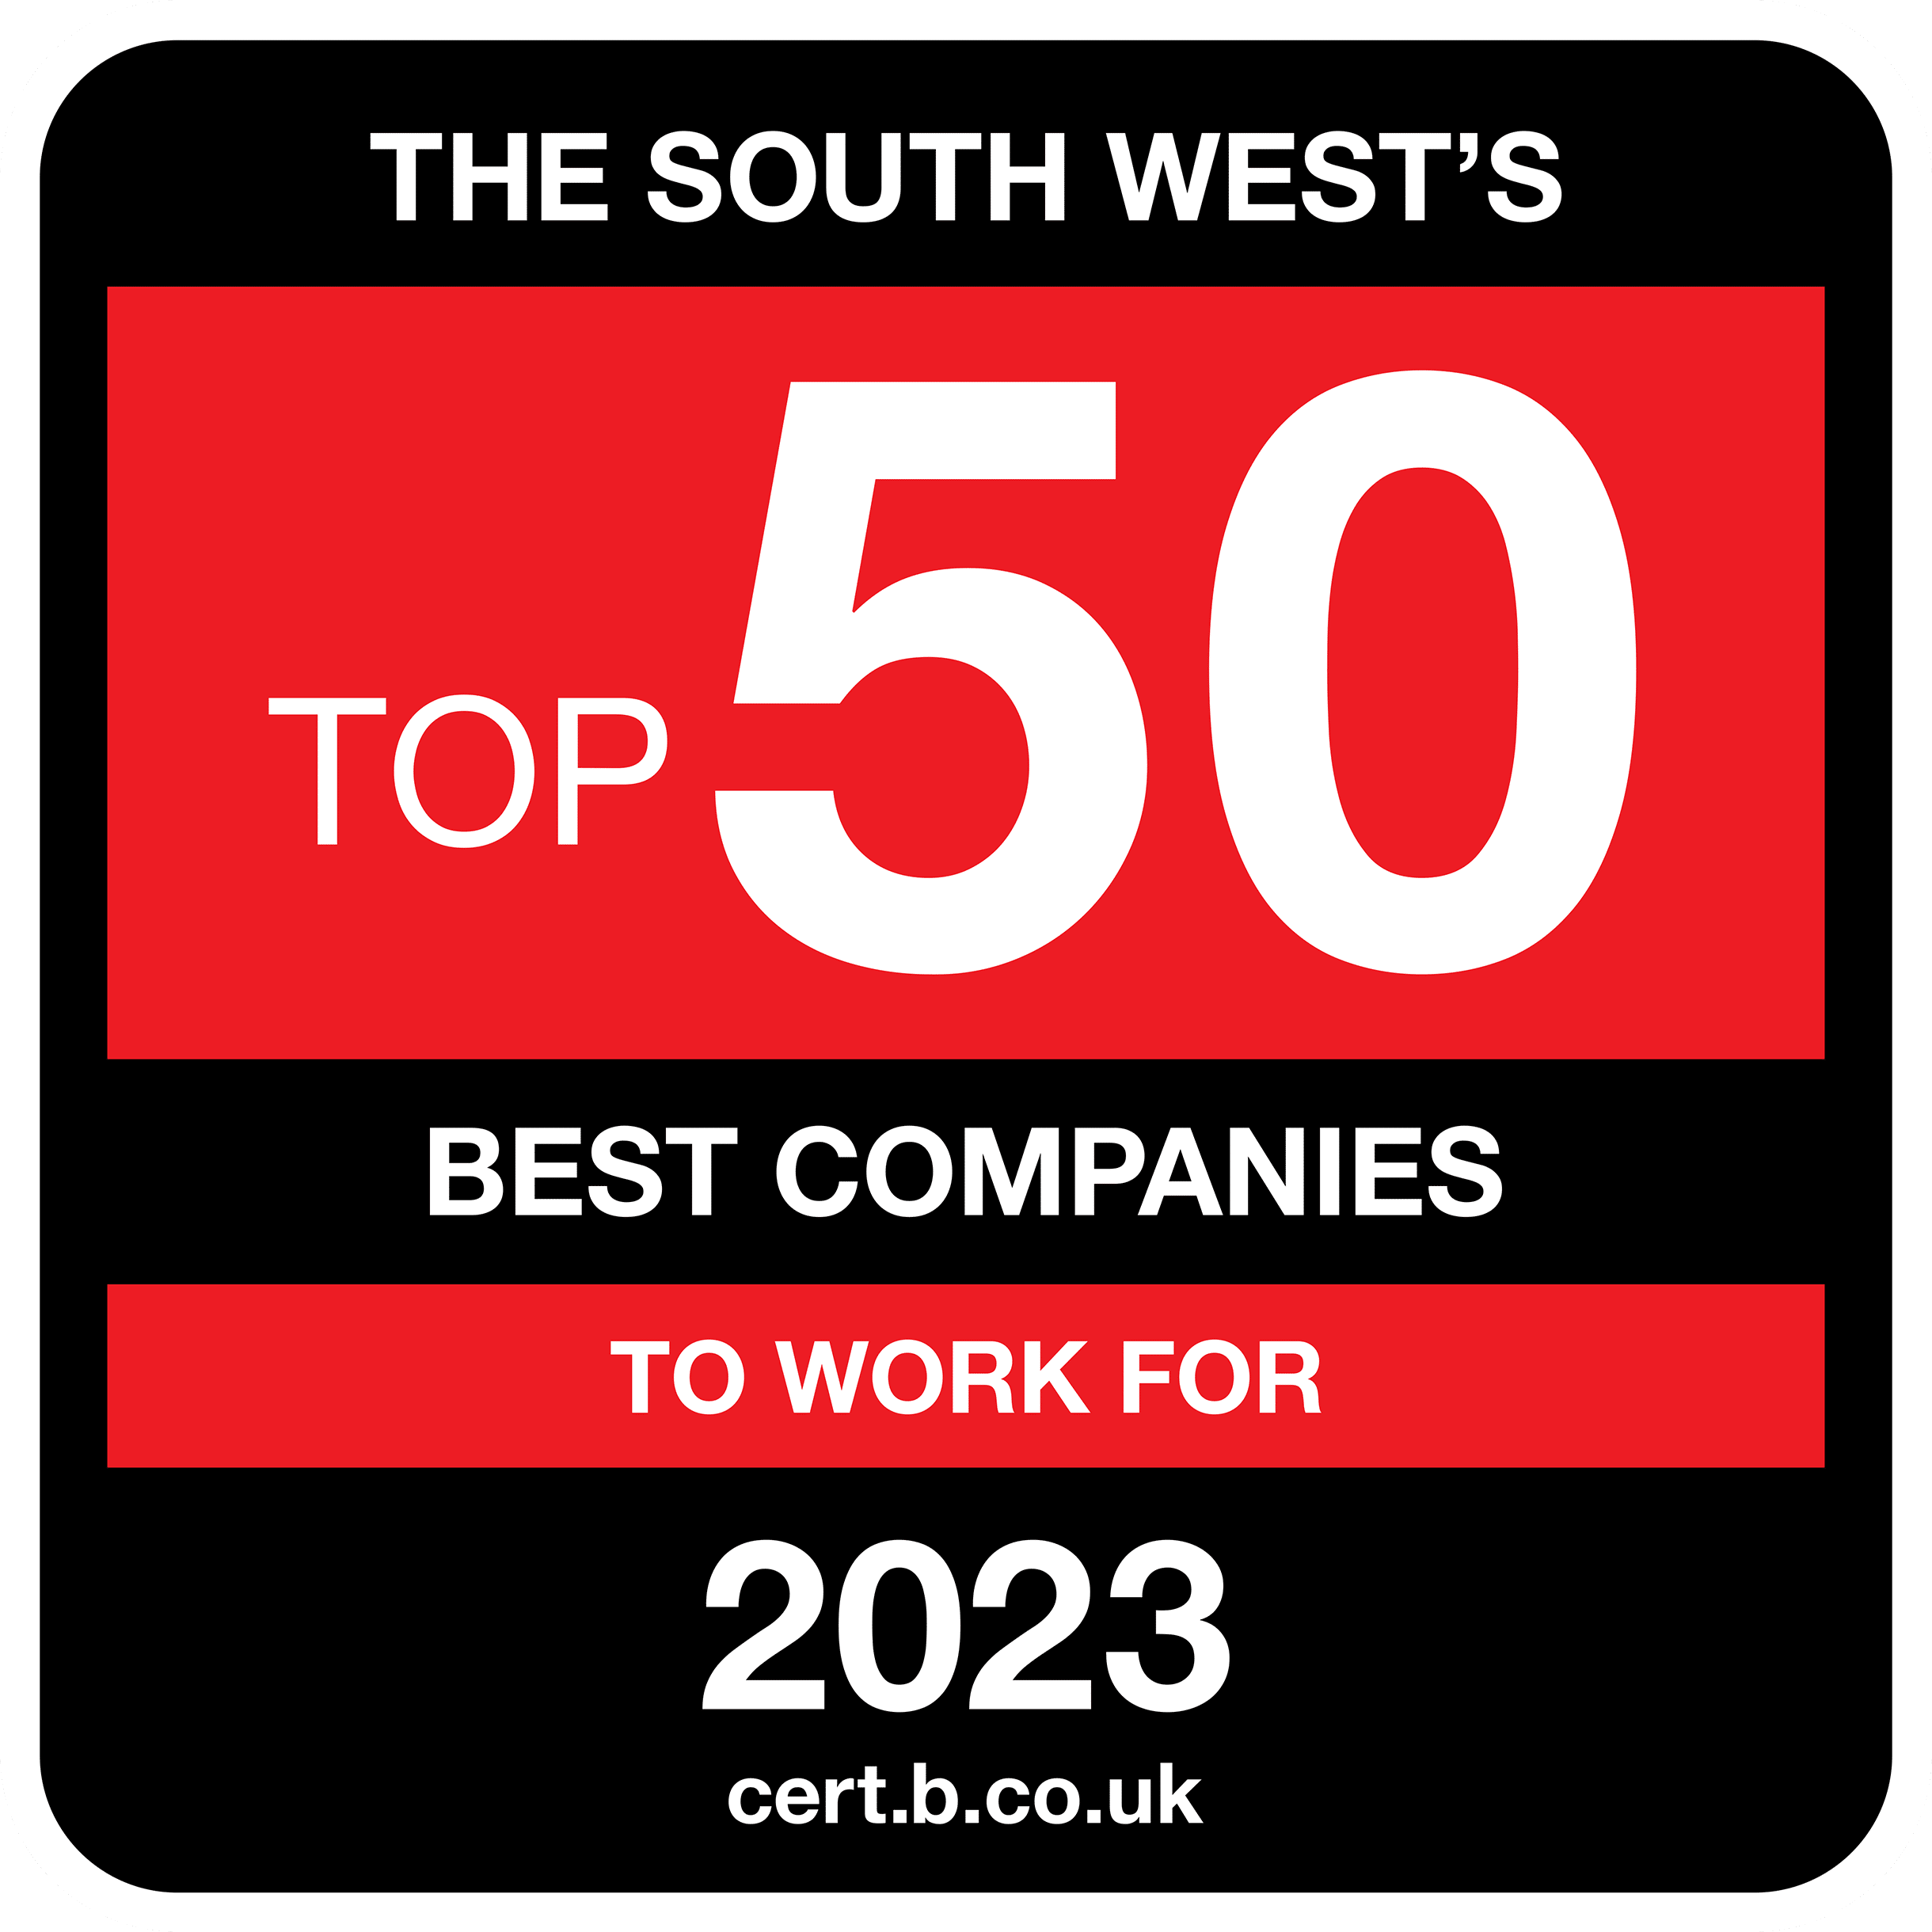 The South West's Best Companies to work for 2023